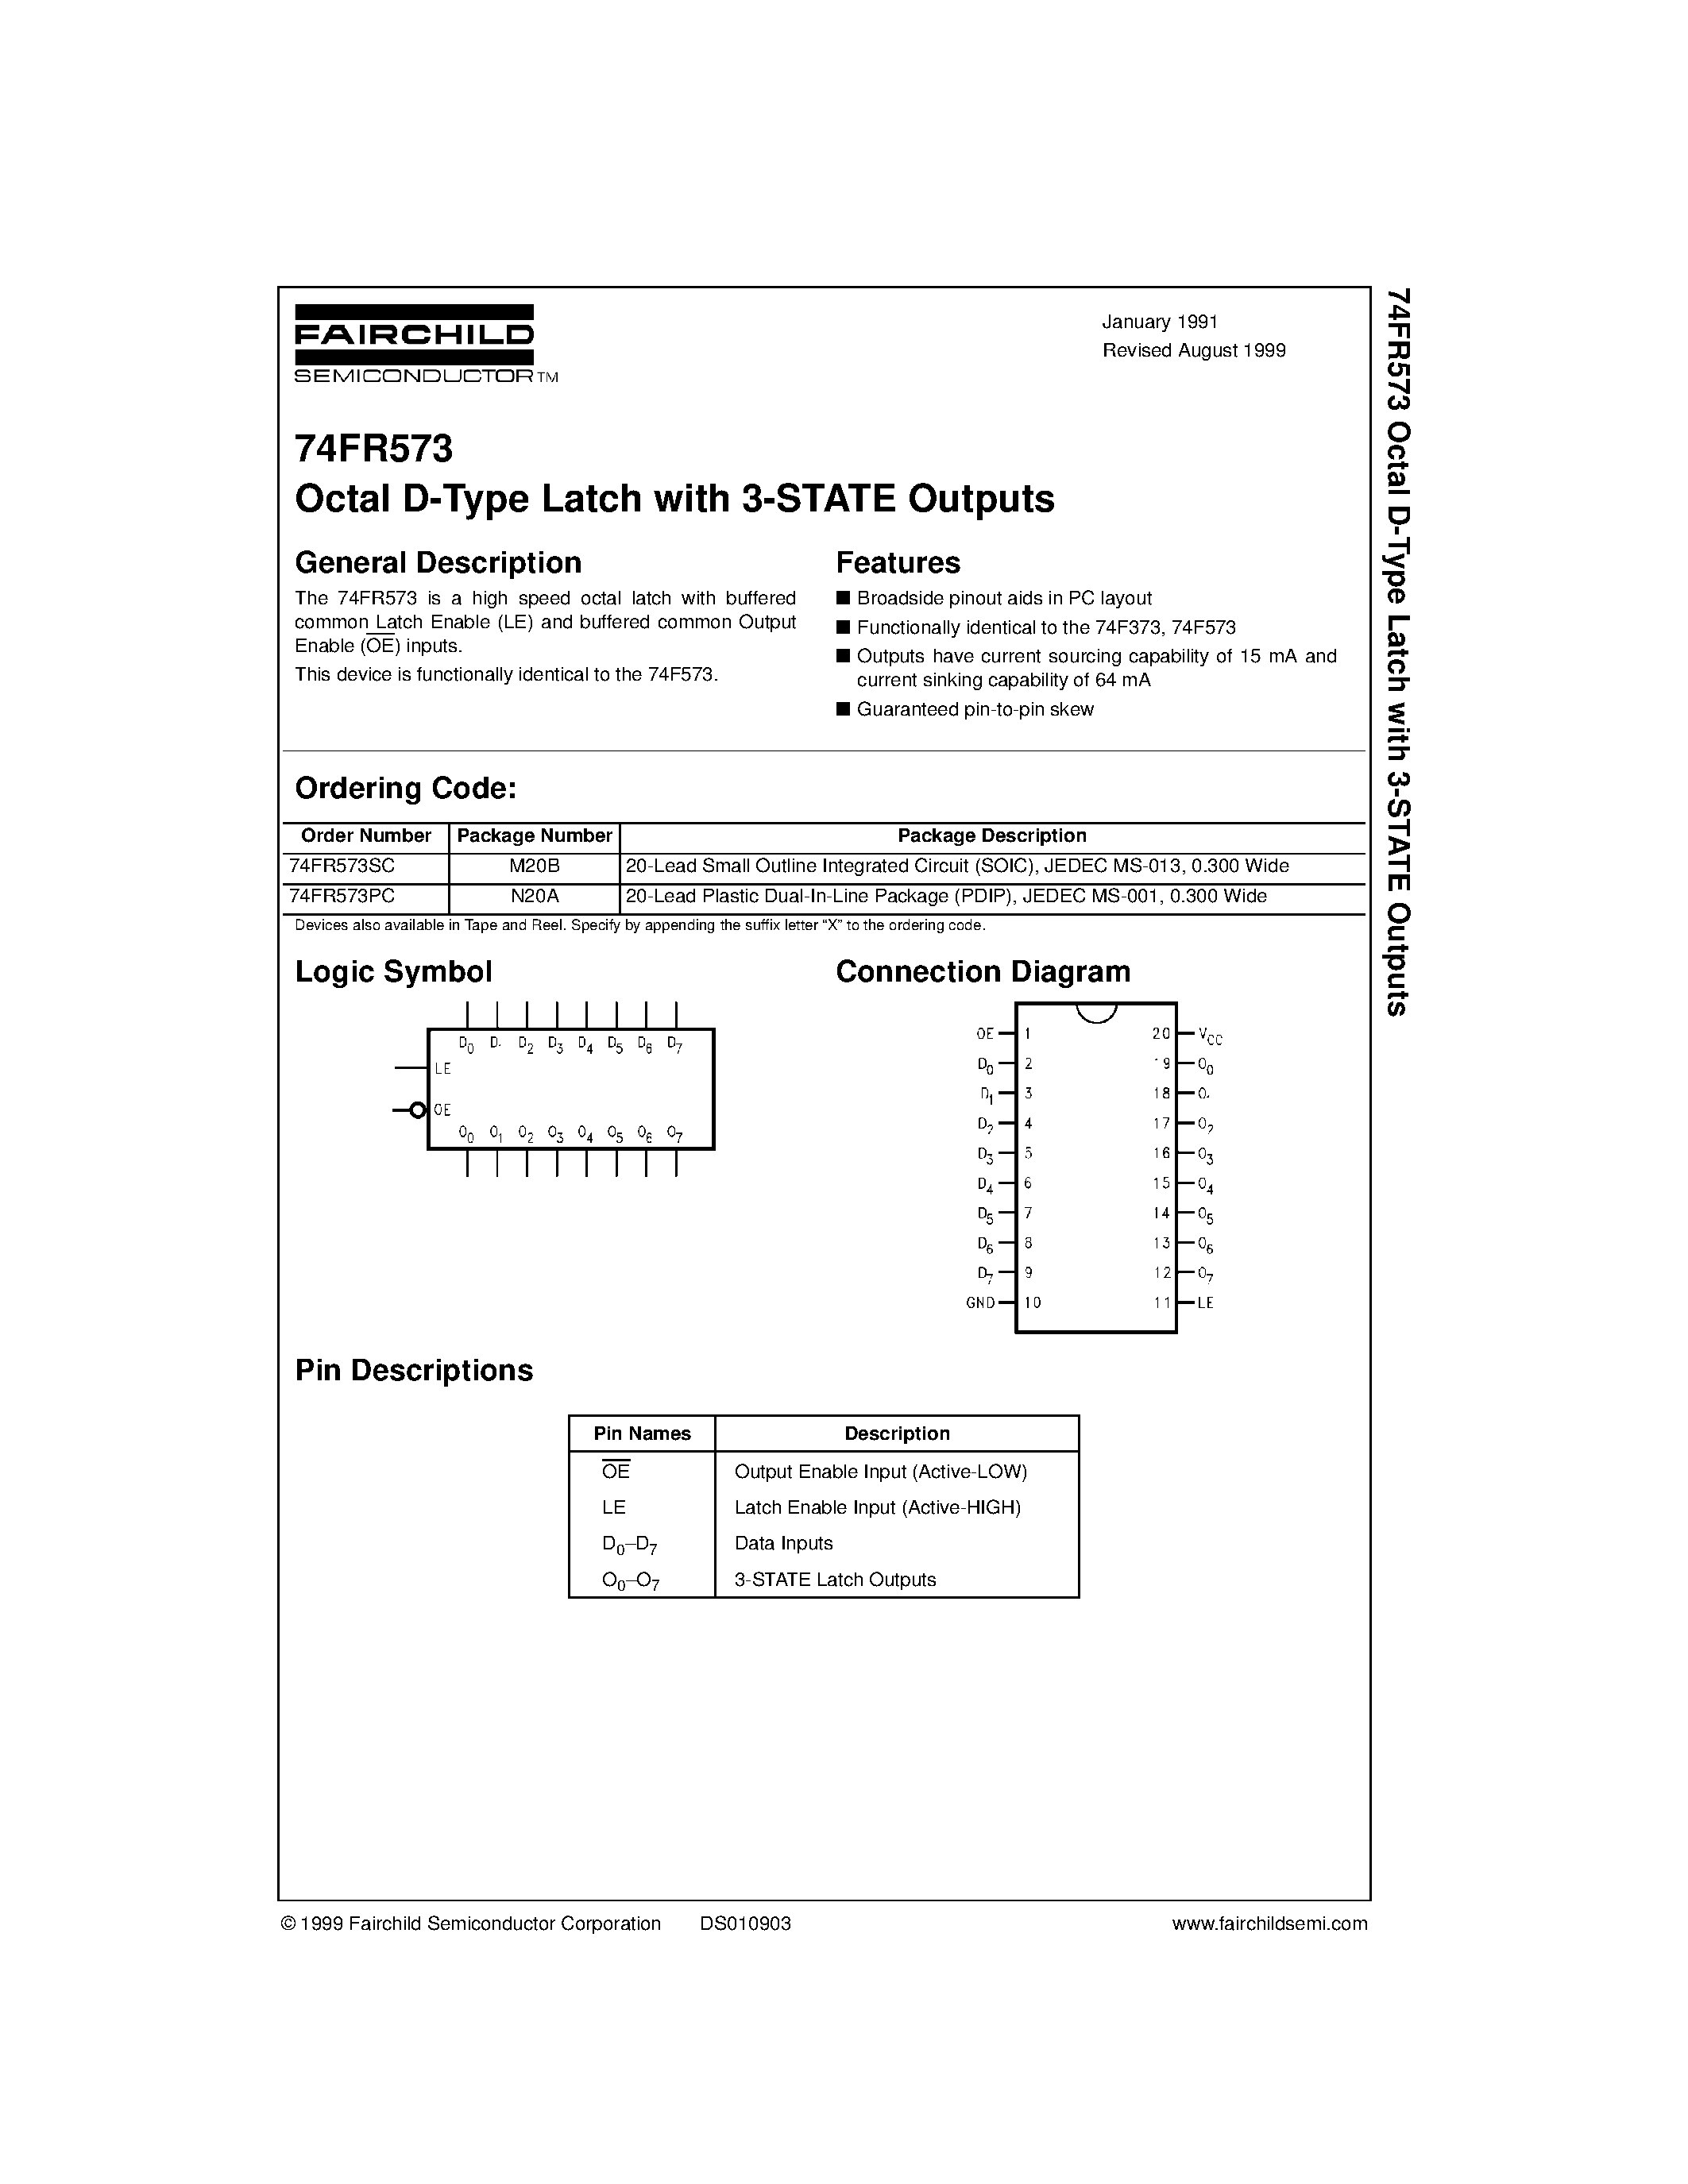 Datasheet 74FR573PC - Octal D-Type Latch with 3-STATE Outputs page 1